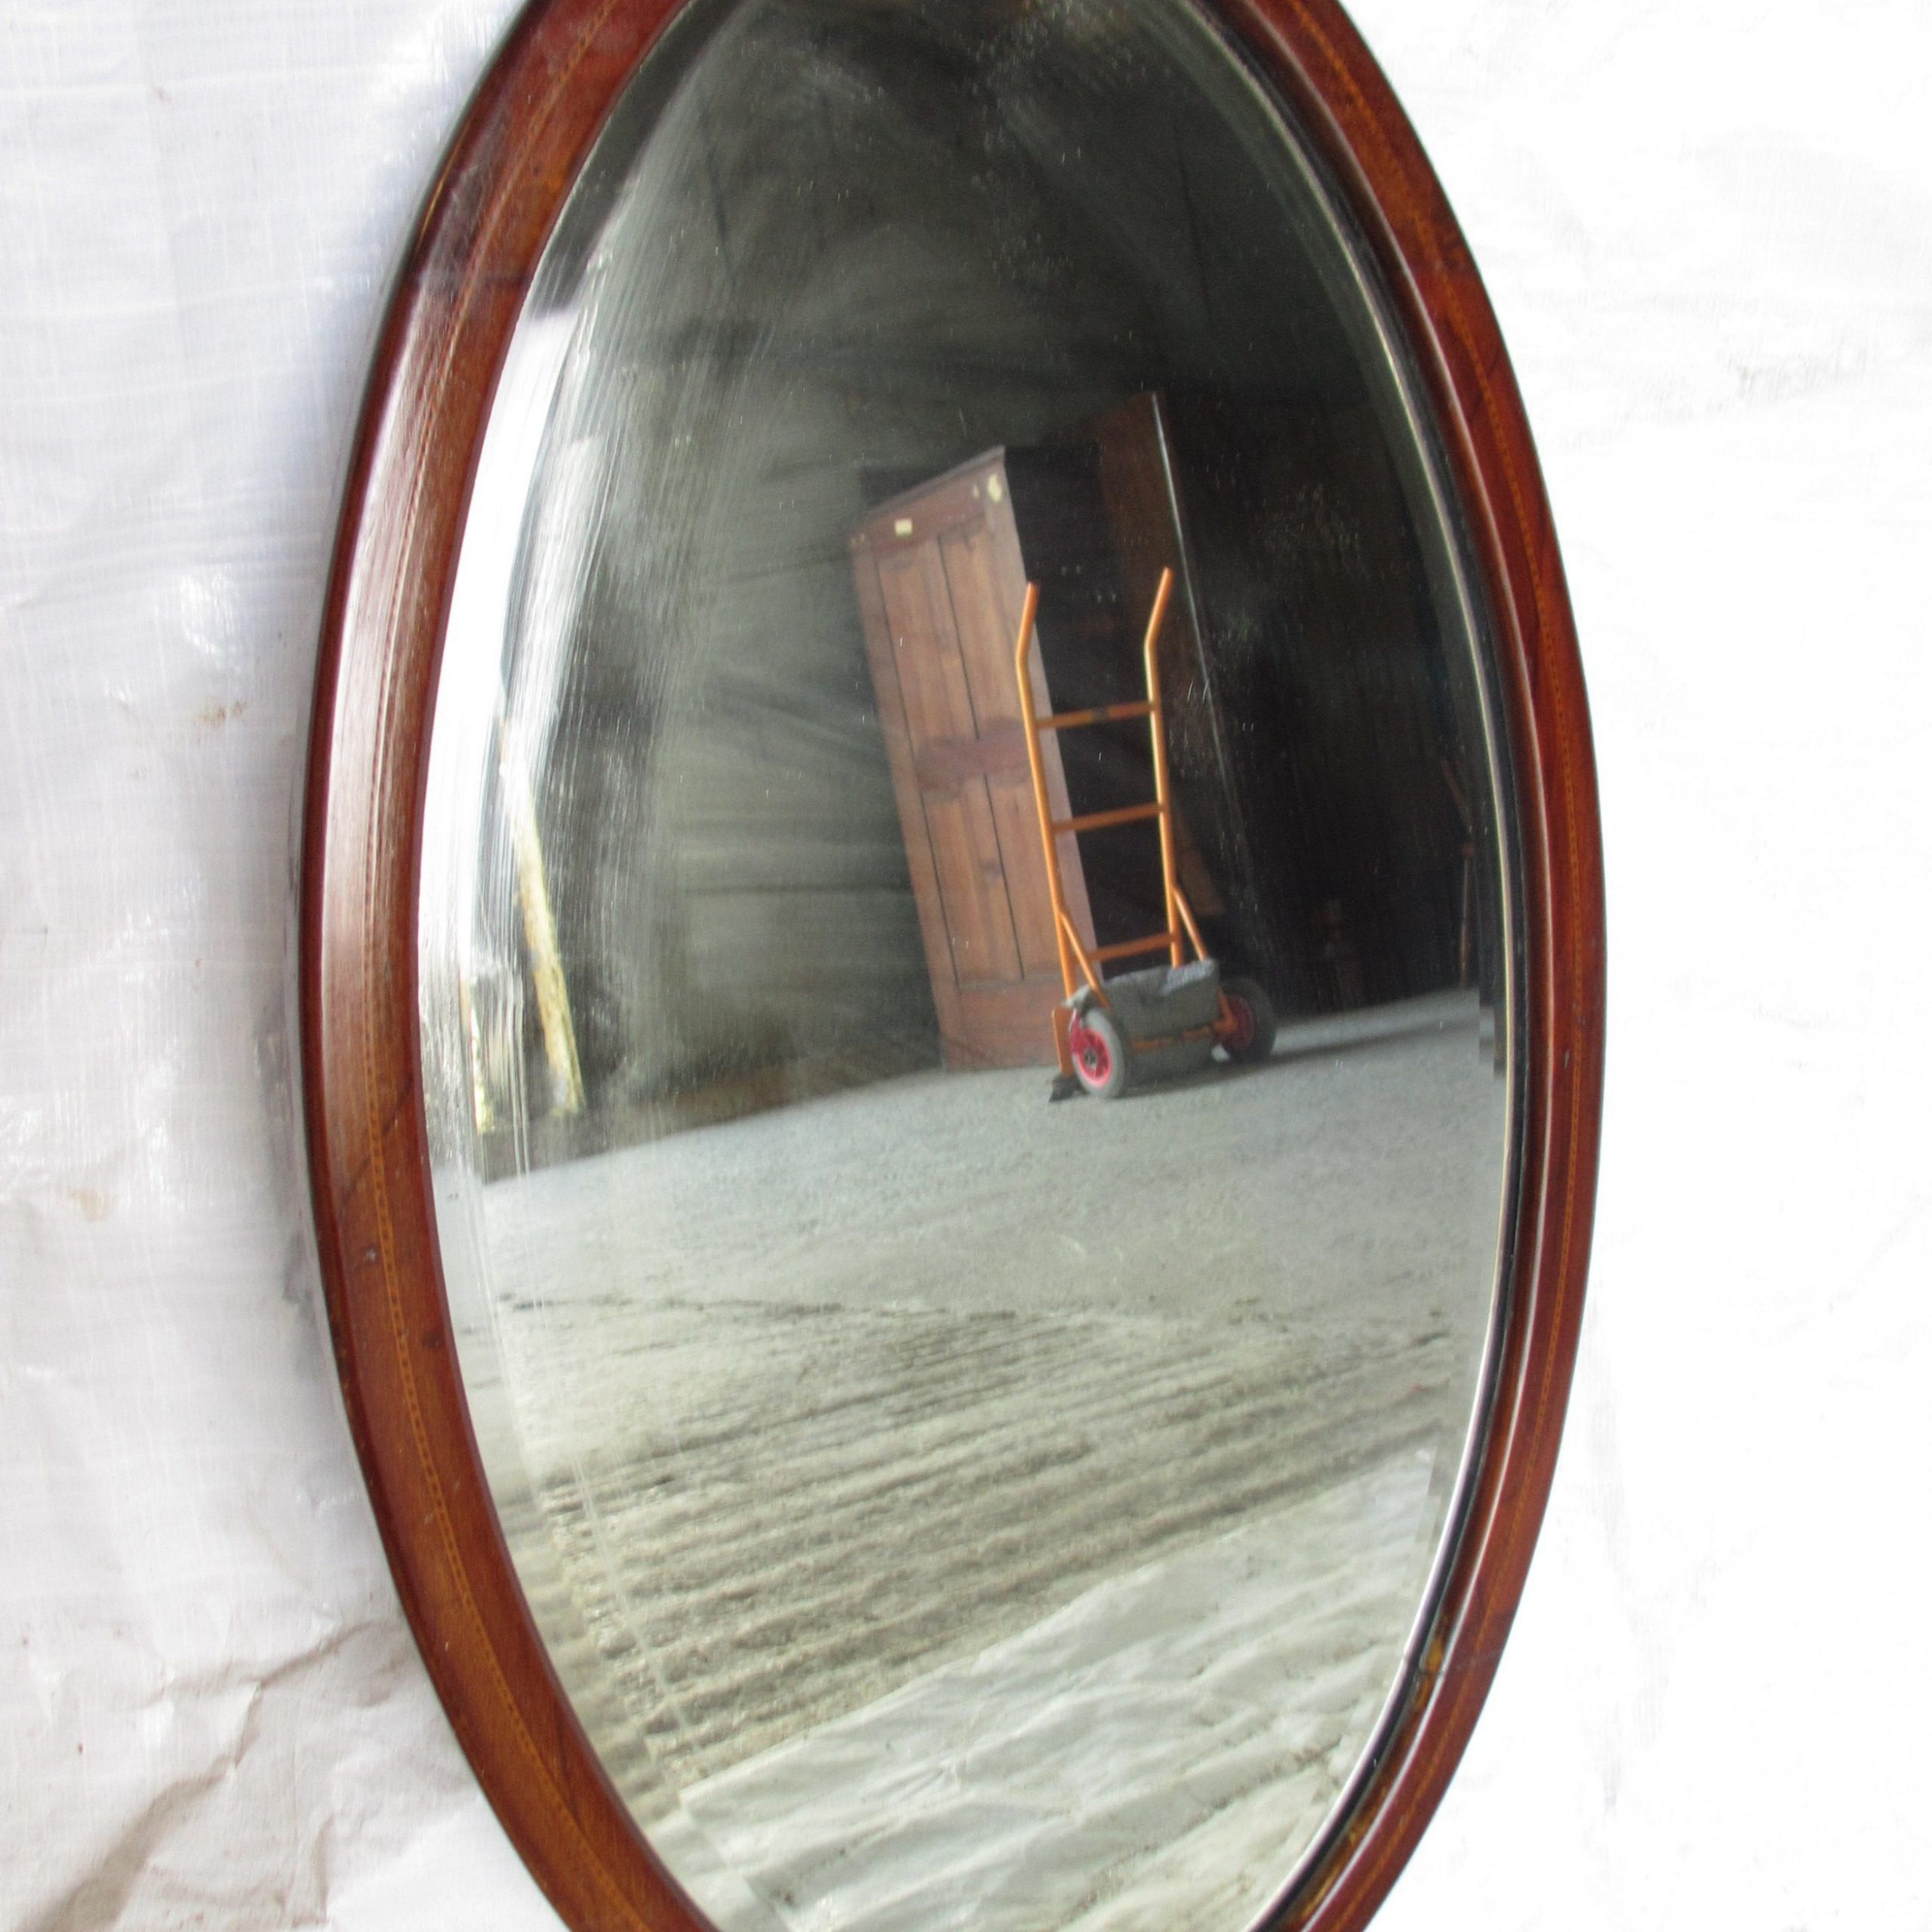 Edwardian Inlaid Mahogany Oval Wall Hanging Mirror With Bevel Glass Throughout Ceiling Hung Oval Mirrors (View 8 of 15)